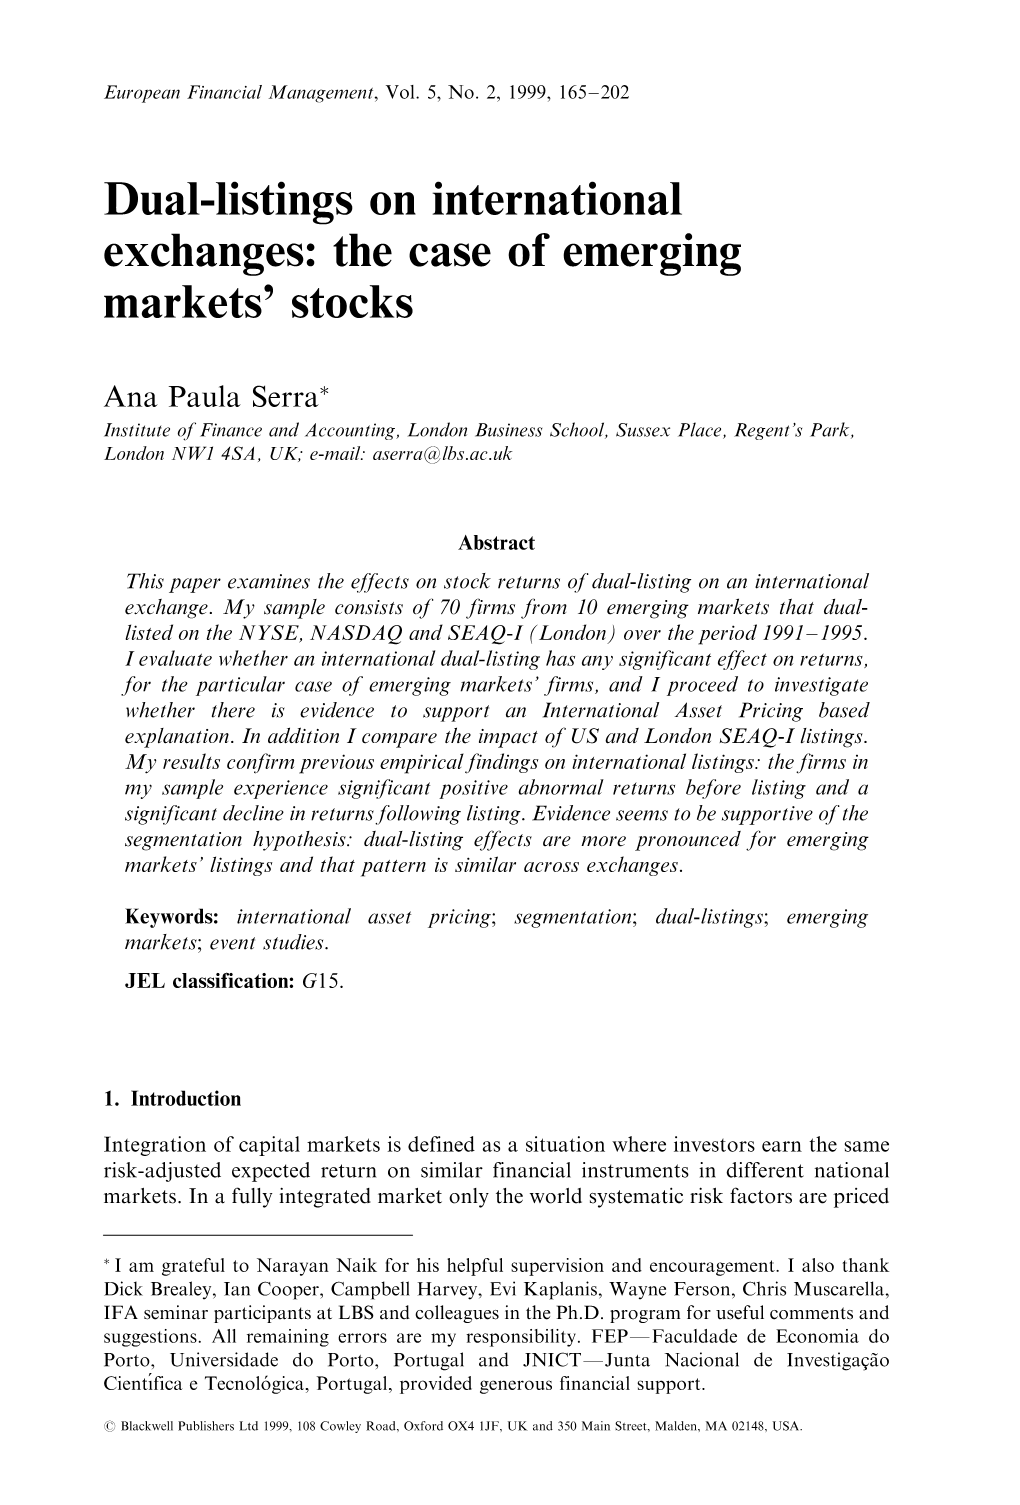 Dual-Listings on International Exchanges: the Case of Emerging Markets' Stocks